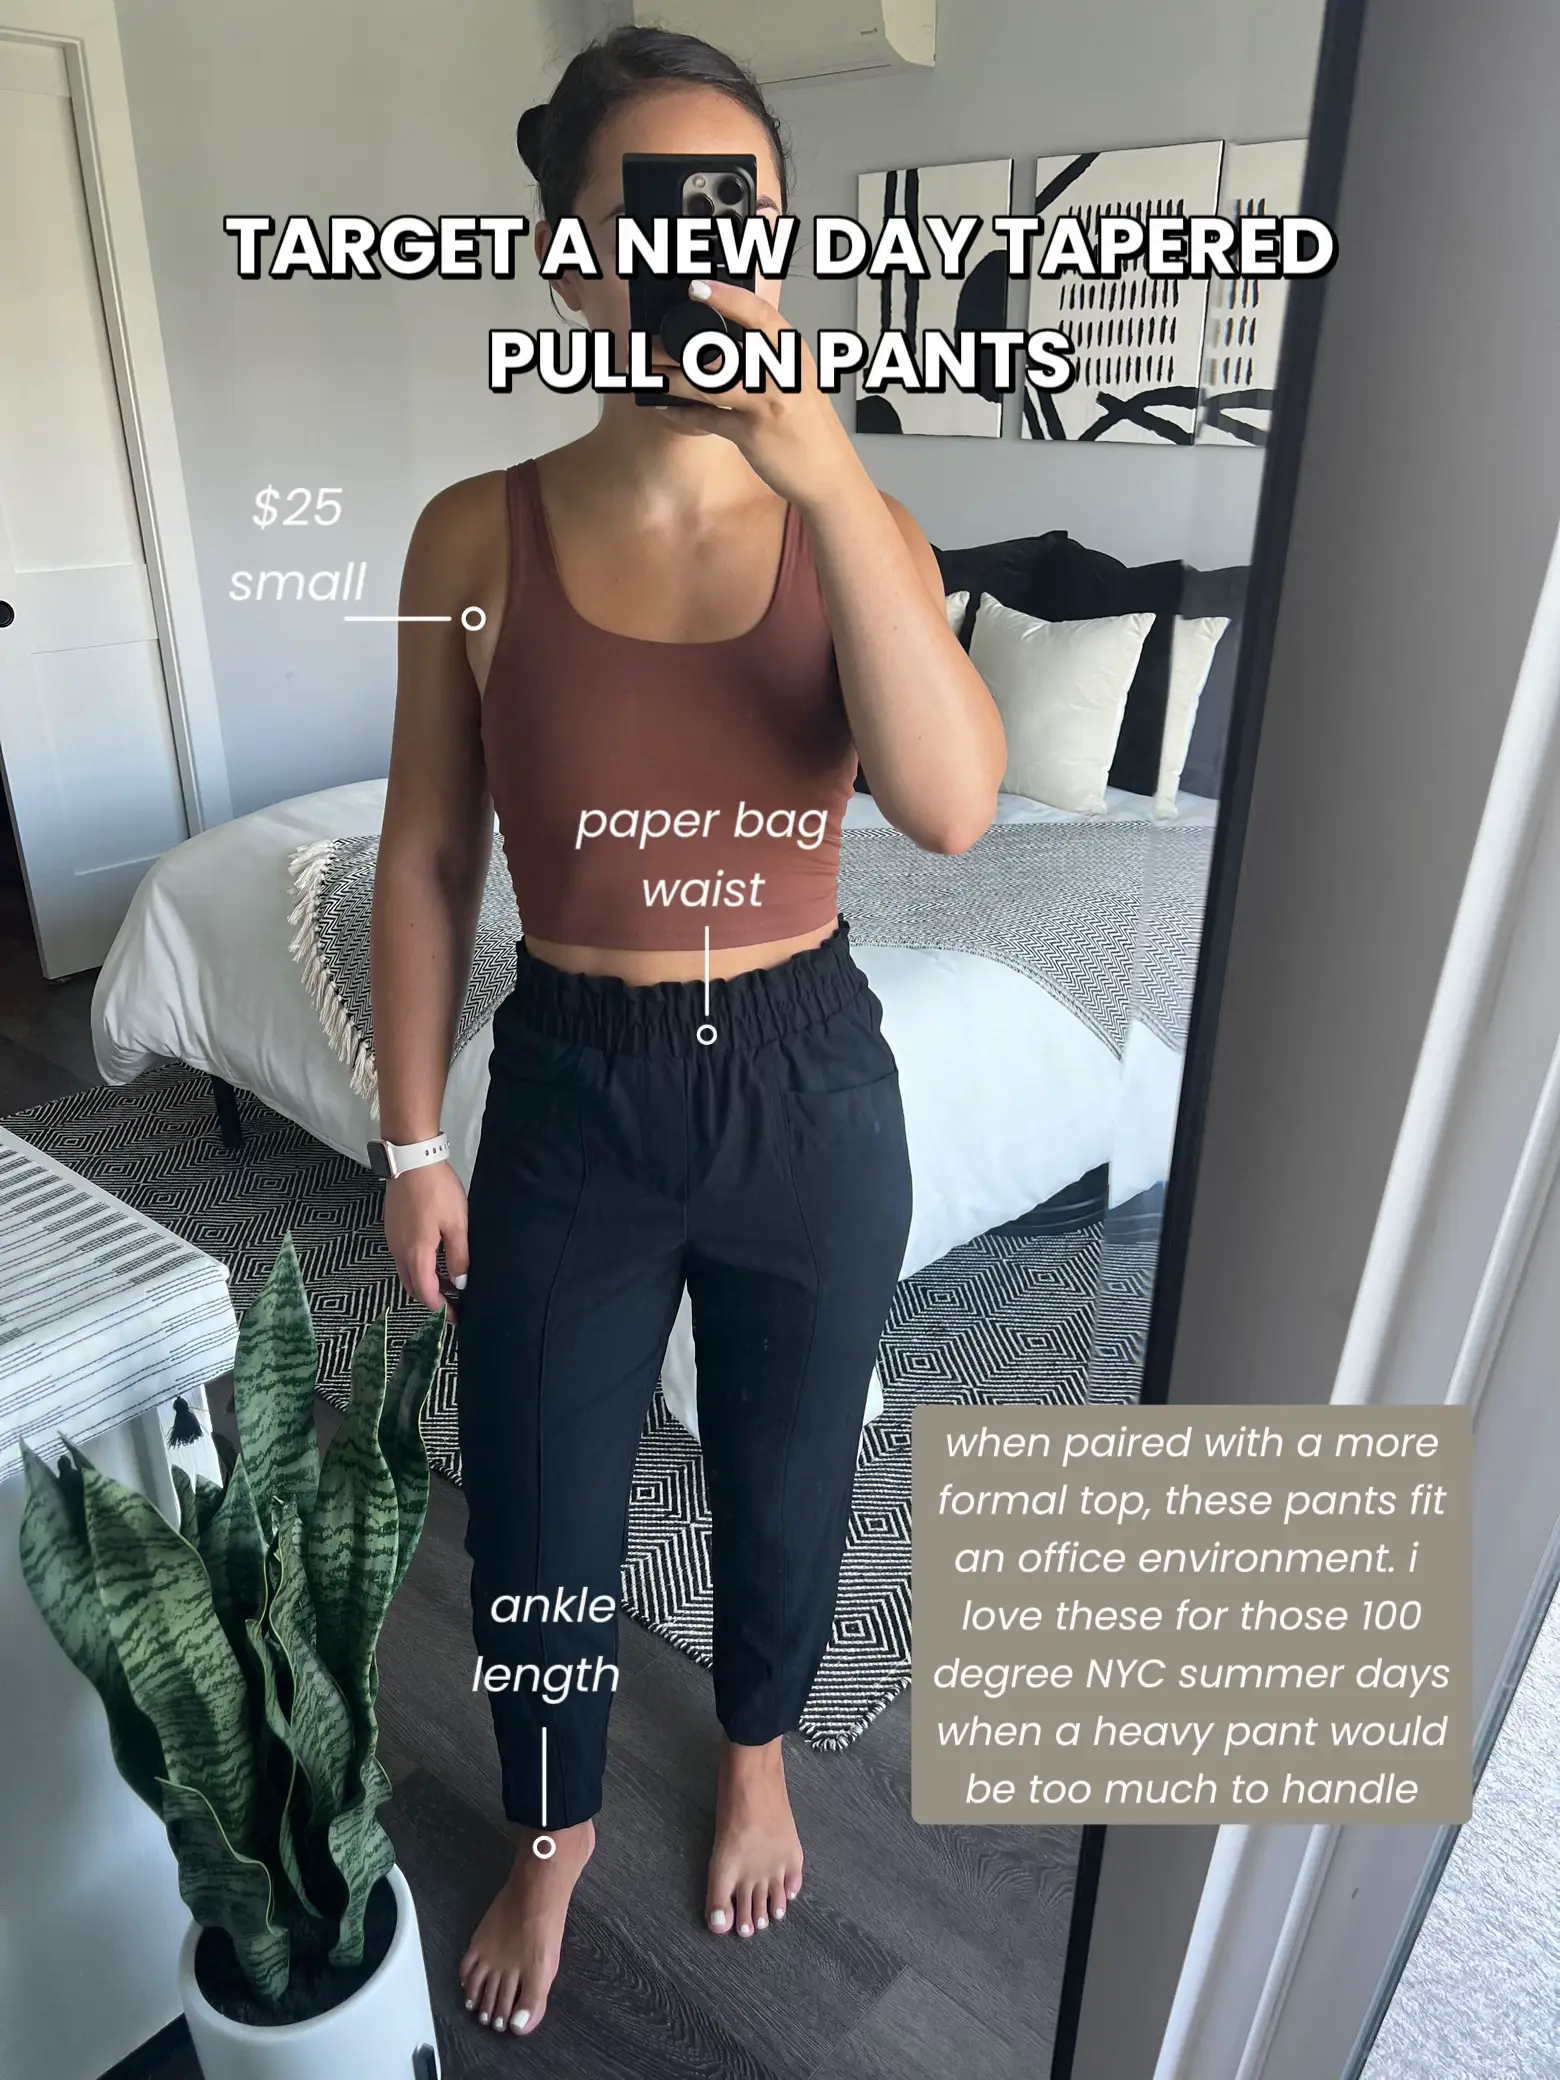 Fitted or flared? One woman's search for the perfect pair of yoga pants -  CNA Lifestyle